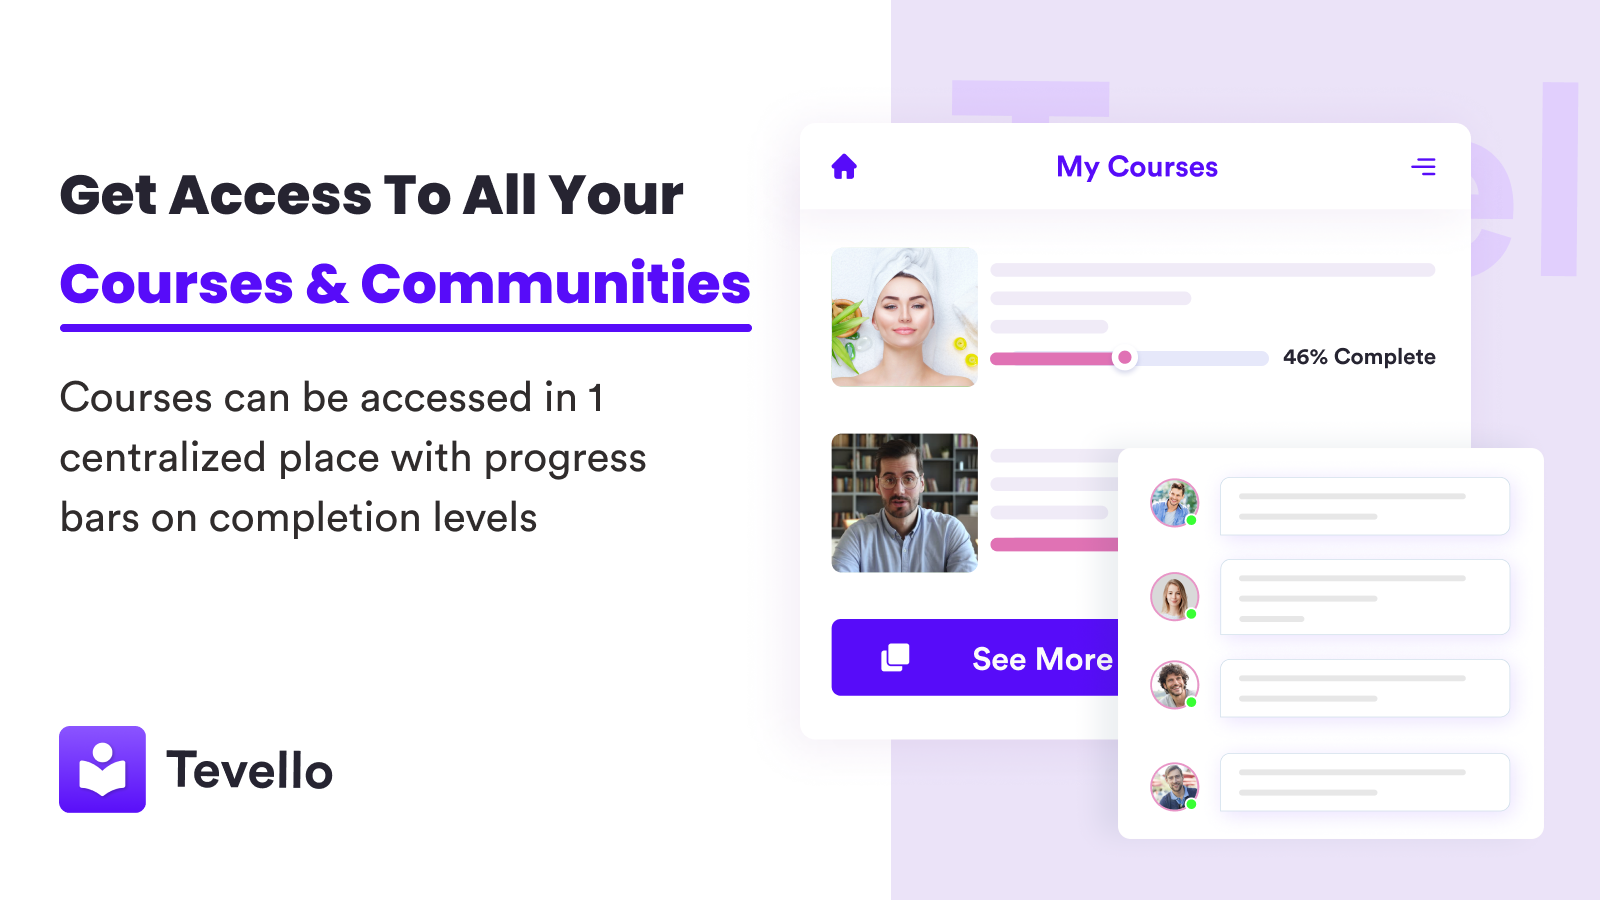 Get Access To All Your Courses & Communities